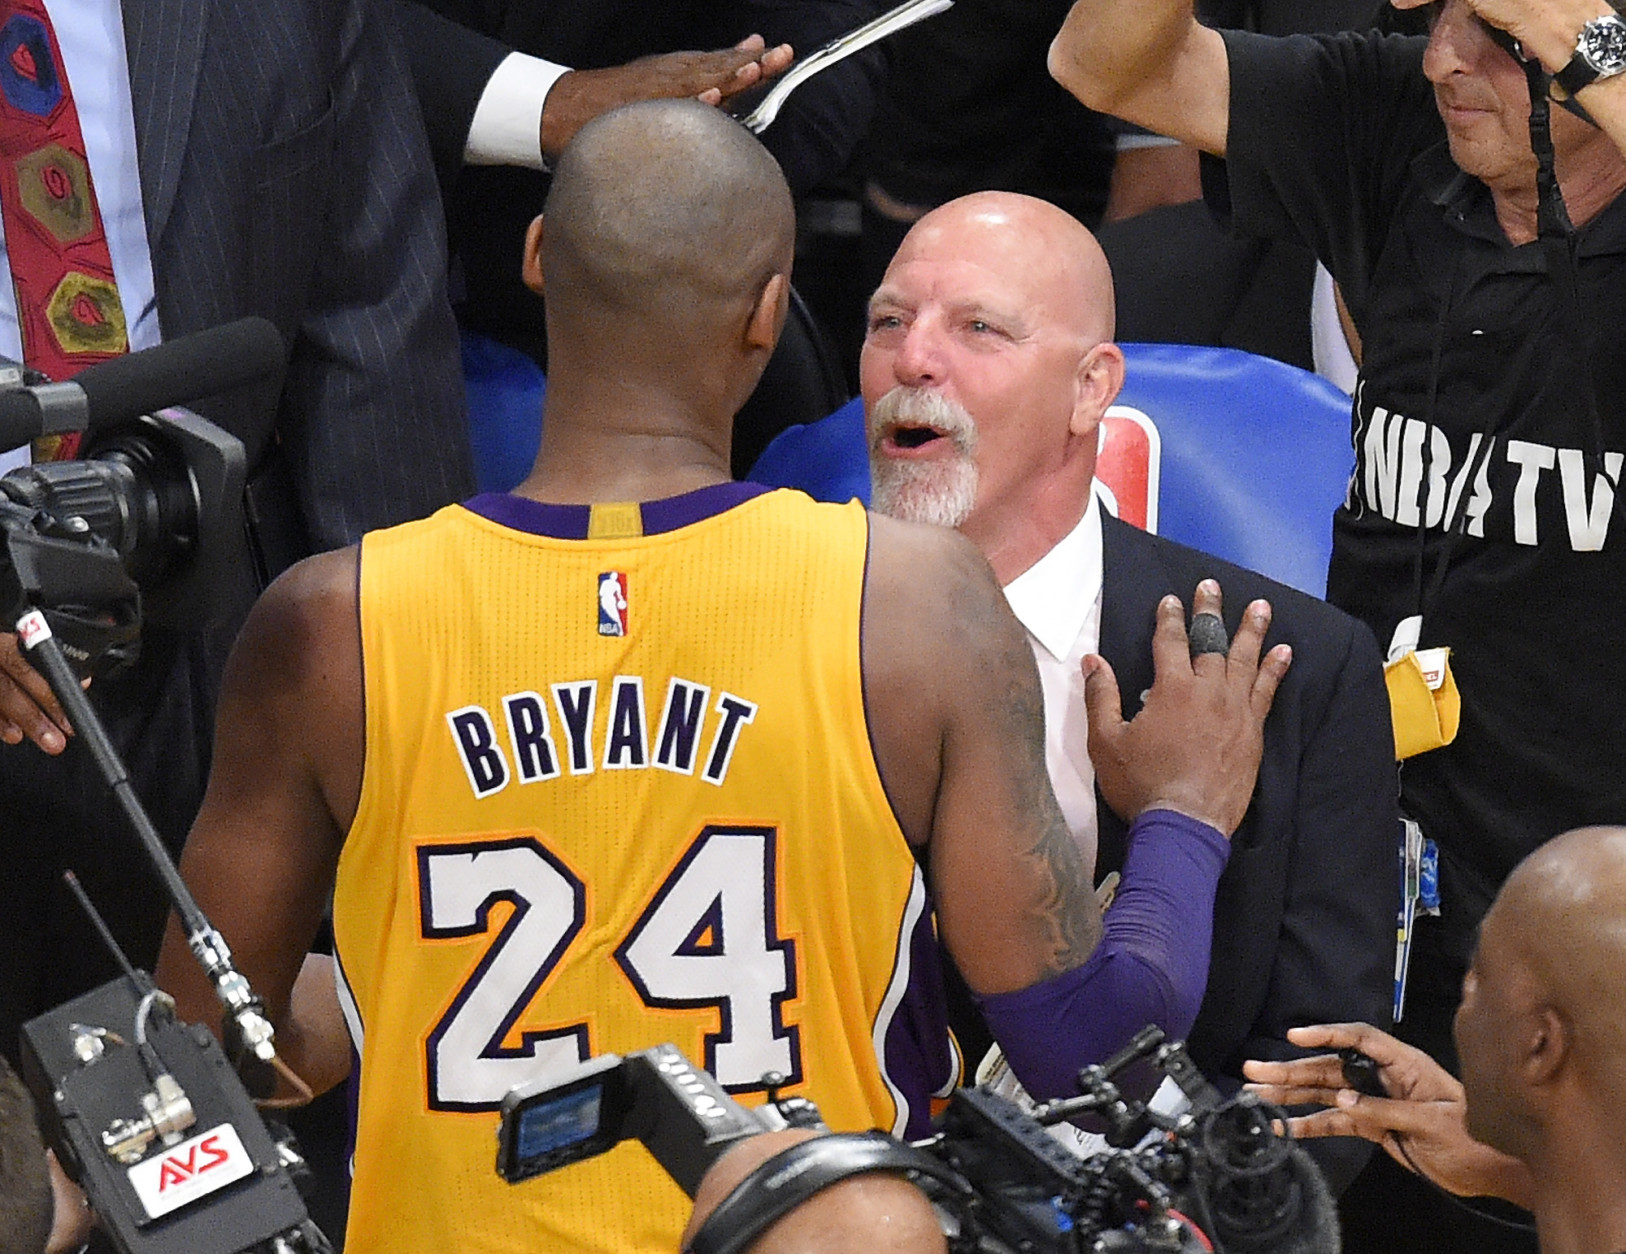 Los Angeles Lakers forward Kobe Bryant, left, and trainer Gary Vitti congratulate each other after an NBA basketball game against the Utah Jazz, Wednesday, April 13, 2016, in Los Angeles. (AP Photo/Mark J. Terrill)